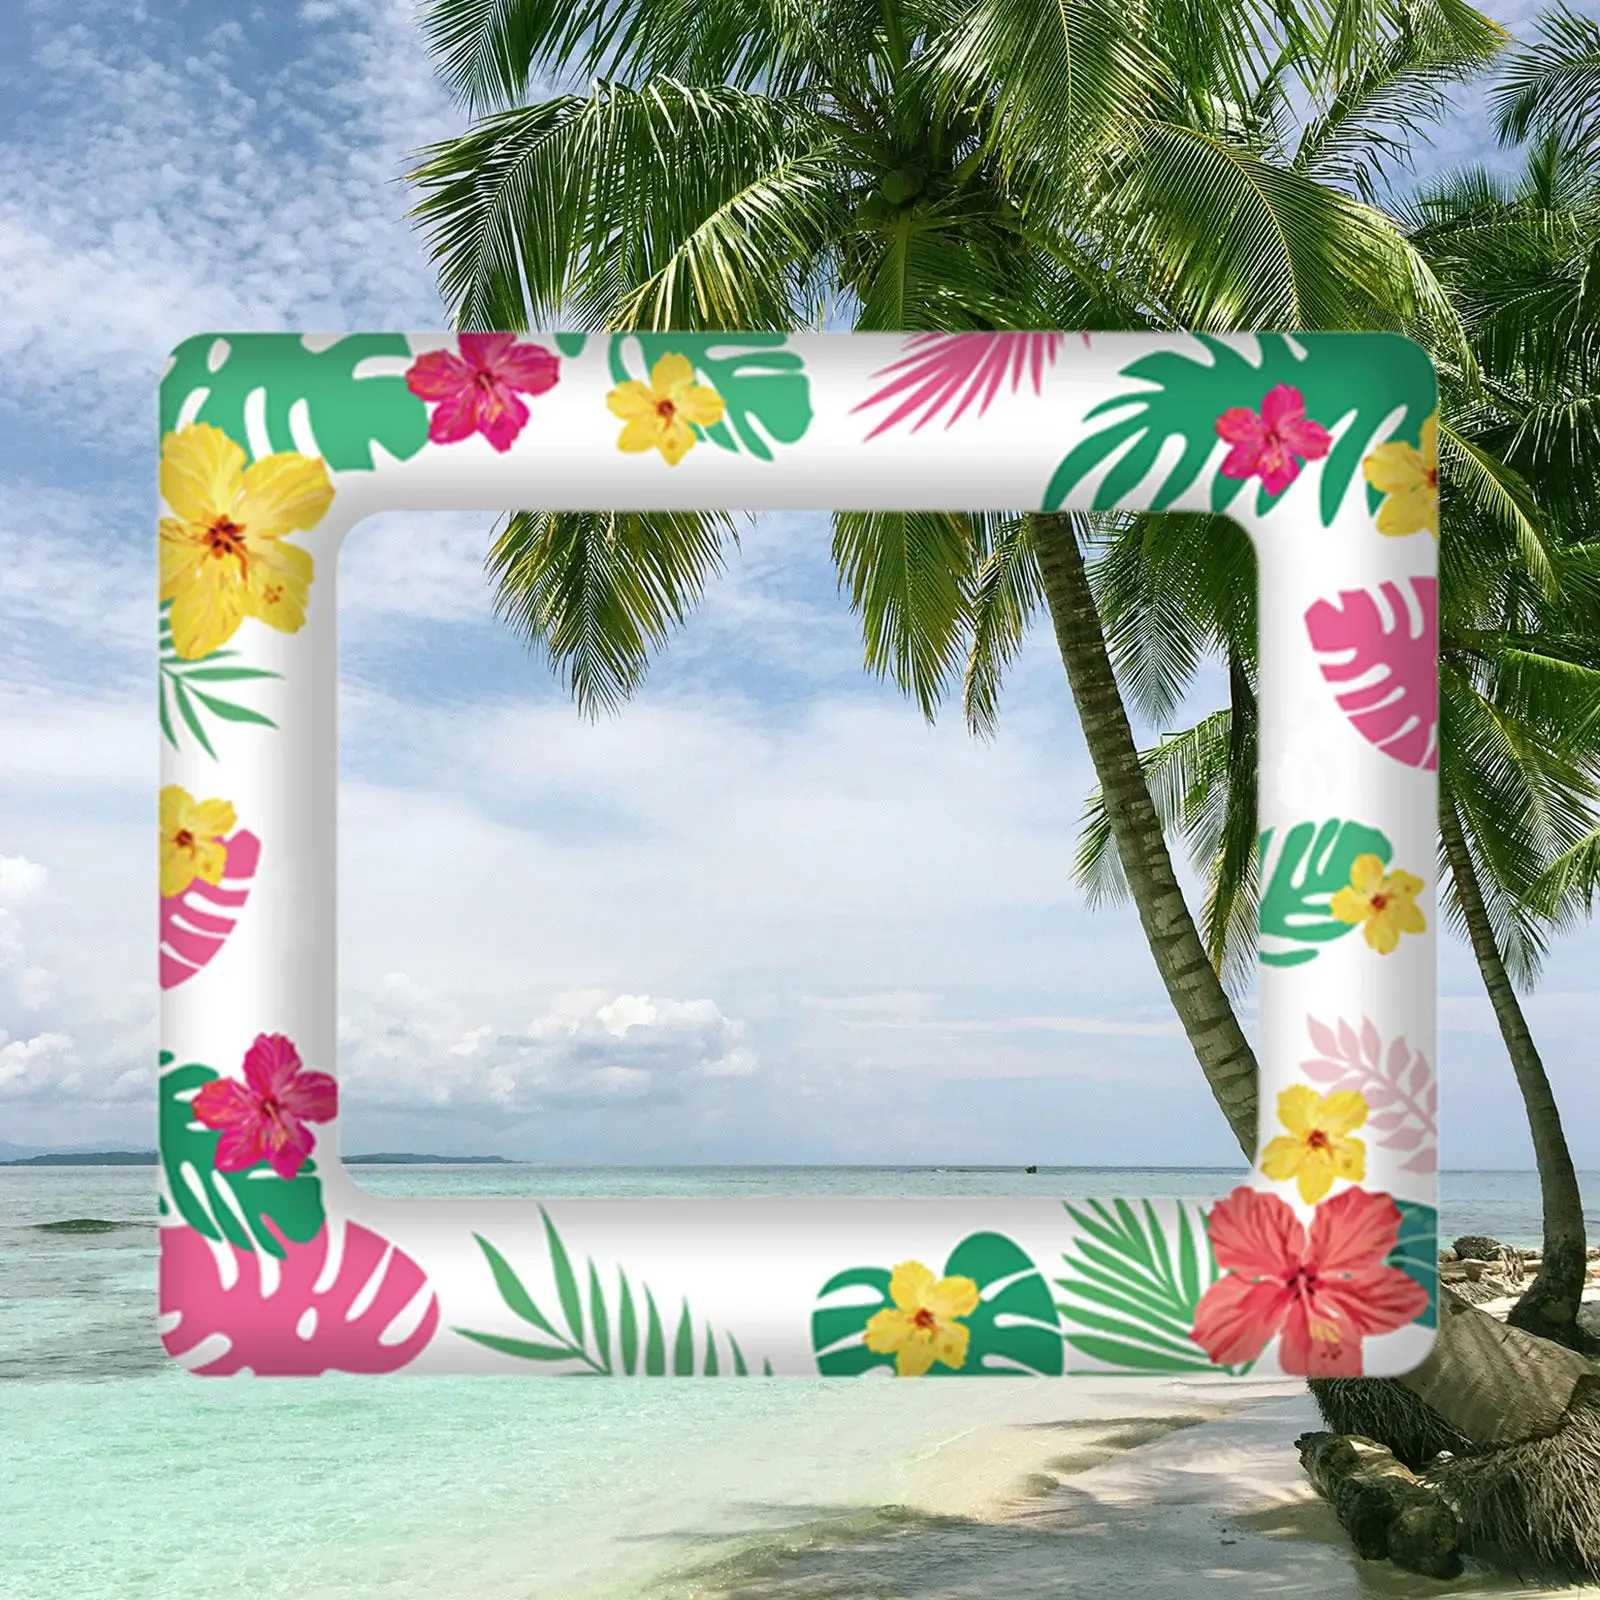 Selfie Photo Frame Lightweight Photo Booth Frame for Carnival Party Birthday